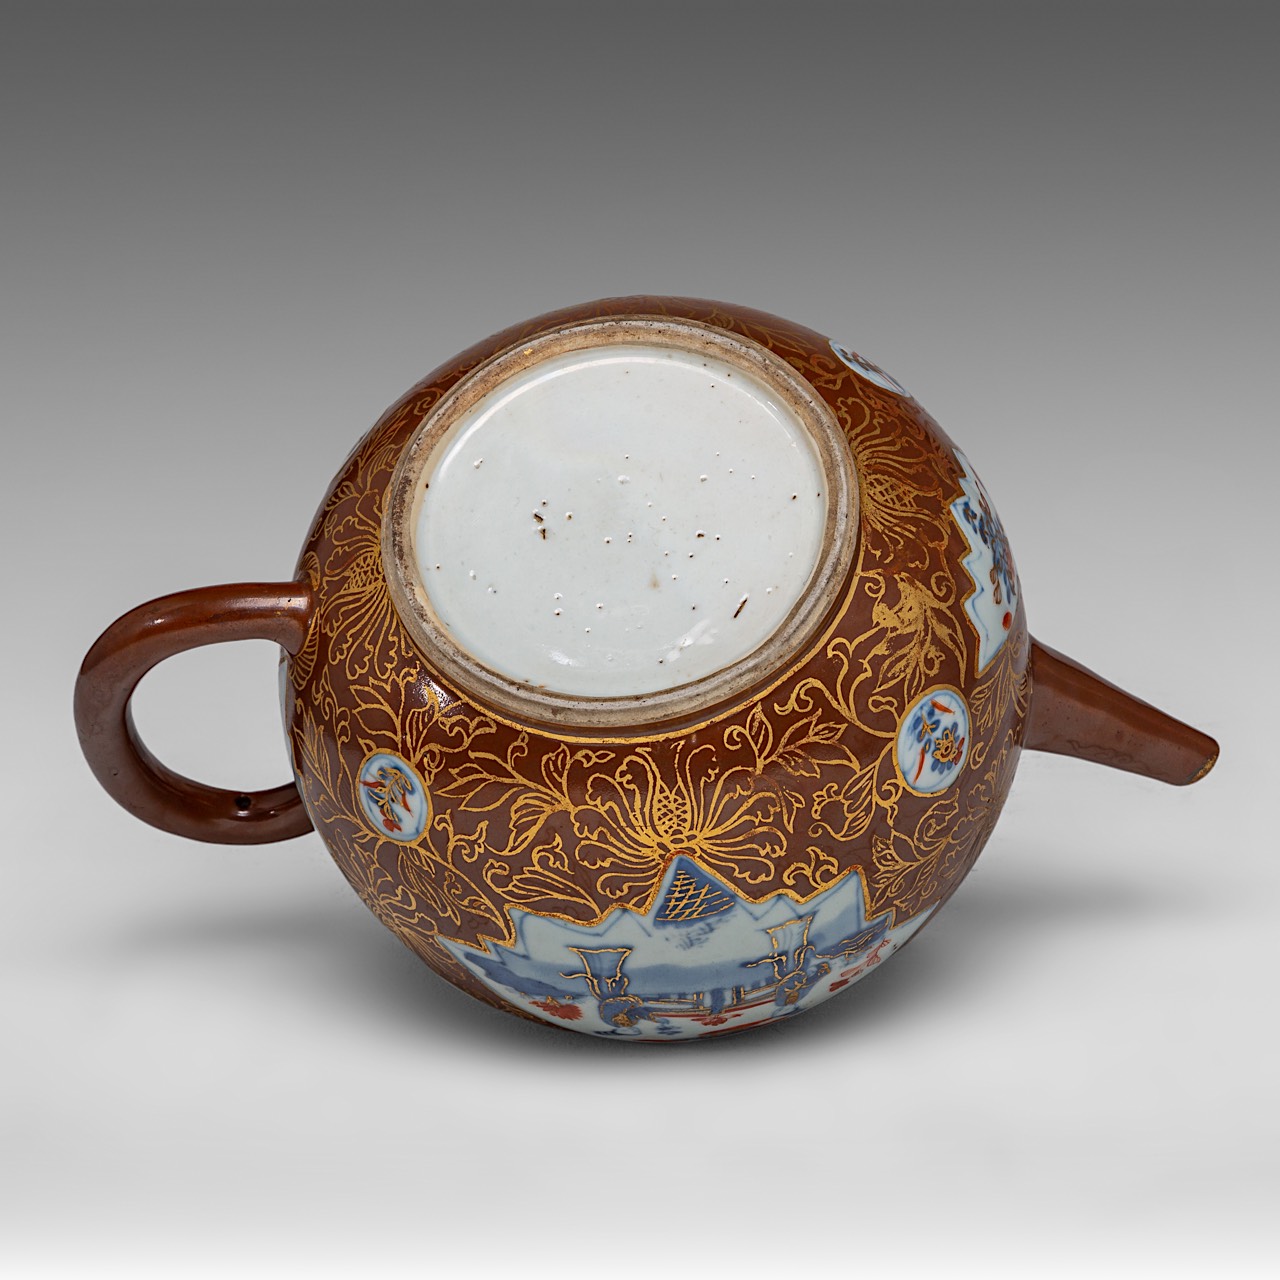 An unusual imposing Chinese cafe-au-lait and Imari teapot, Kangxi period, H 19,5 - L 27,5 cm - added - Image 7 of 17